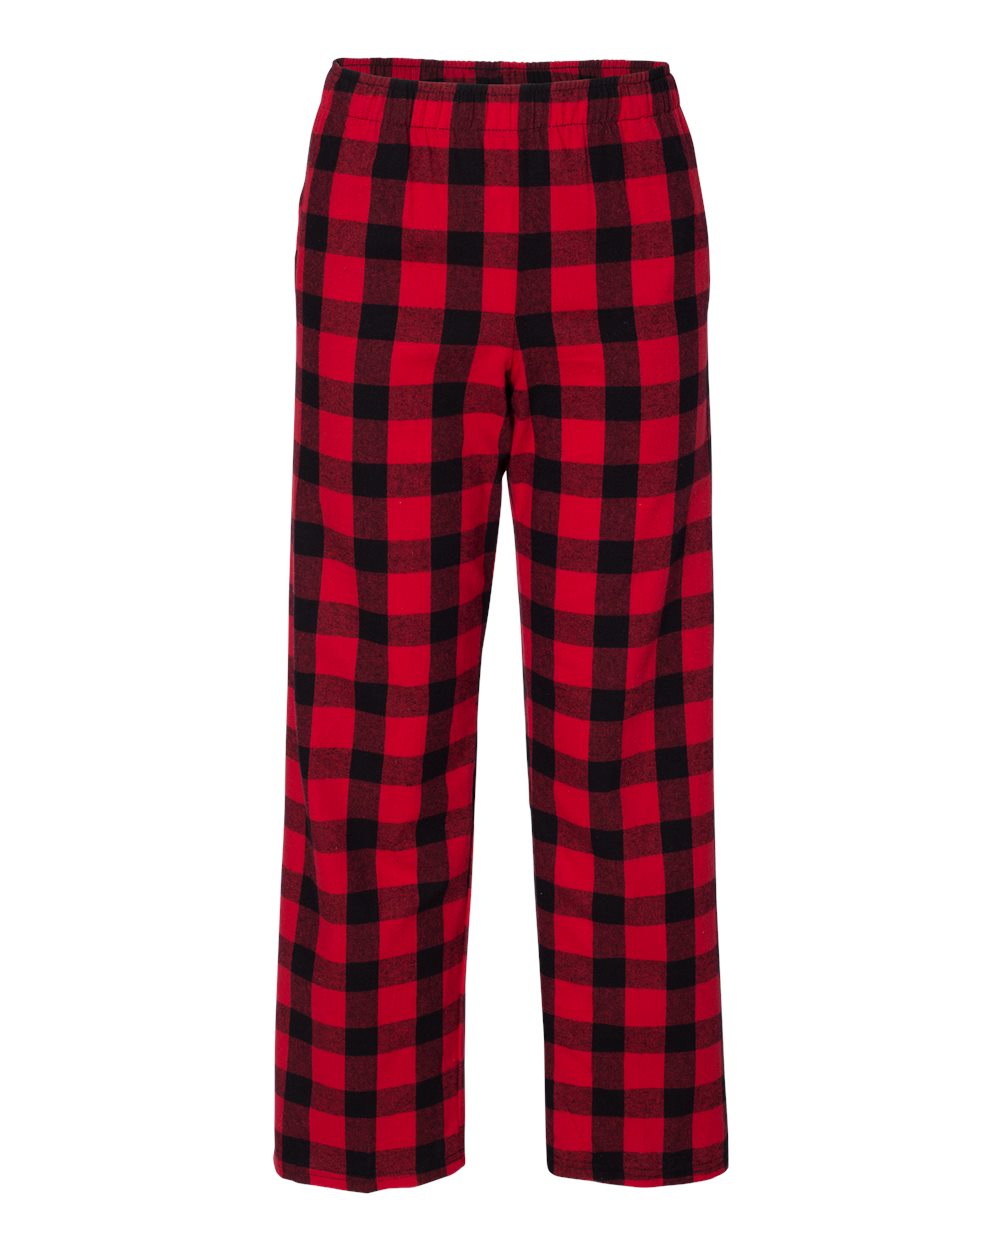 black and red flannel pants